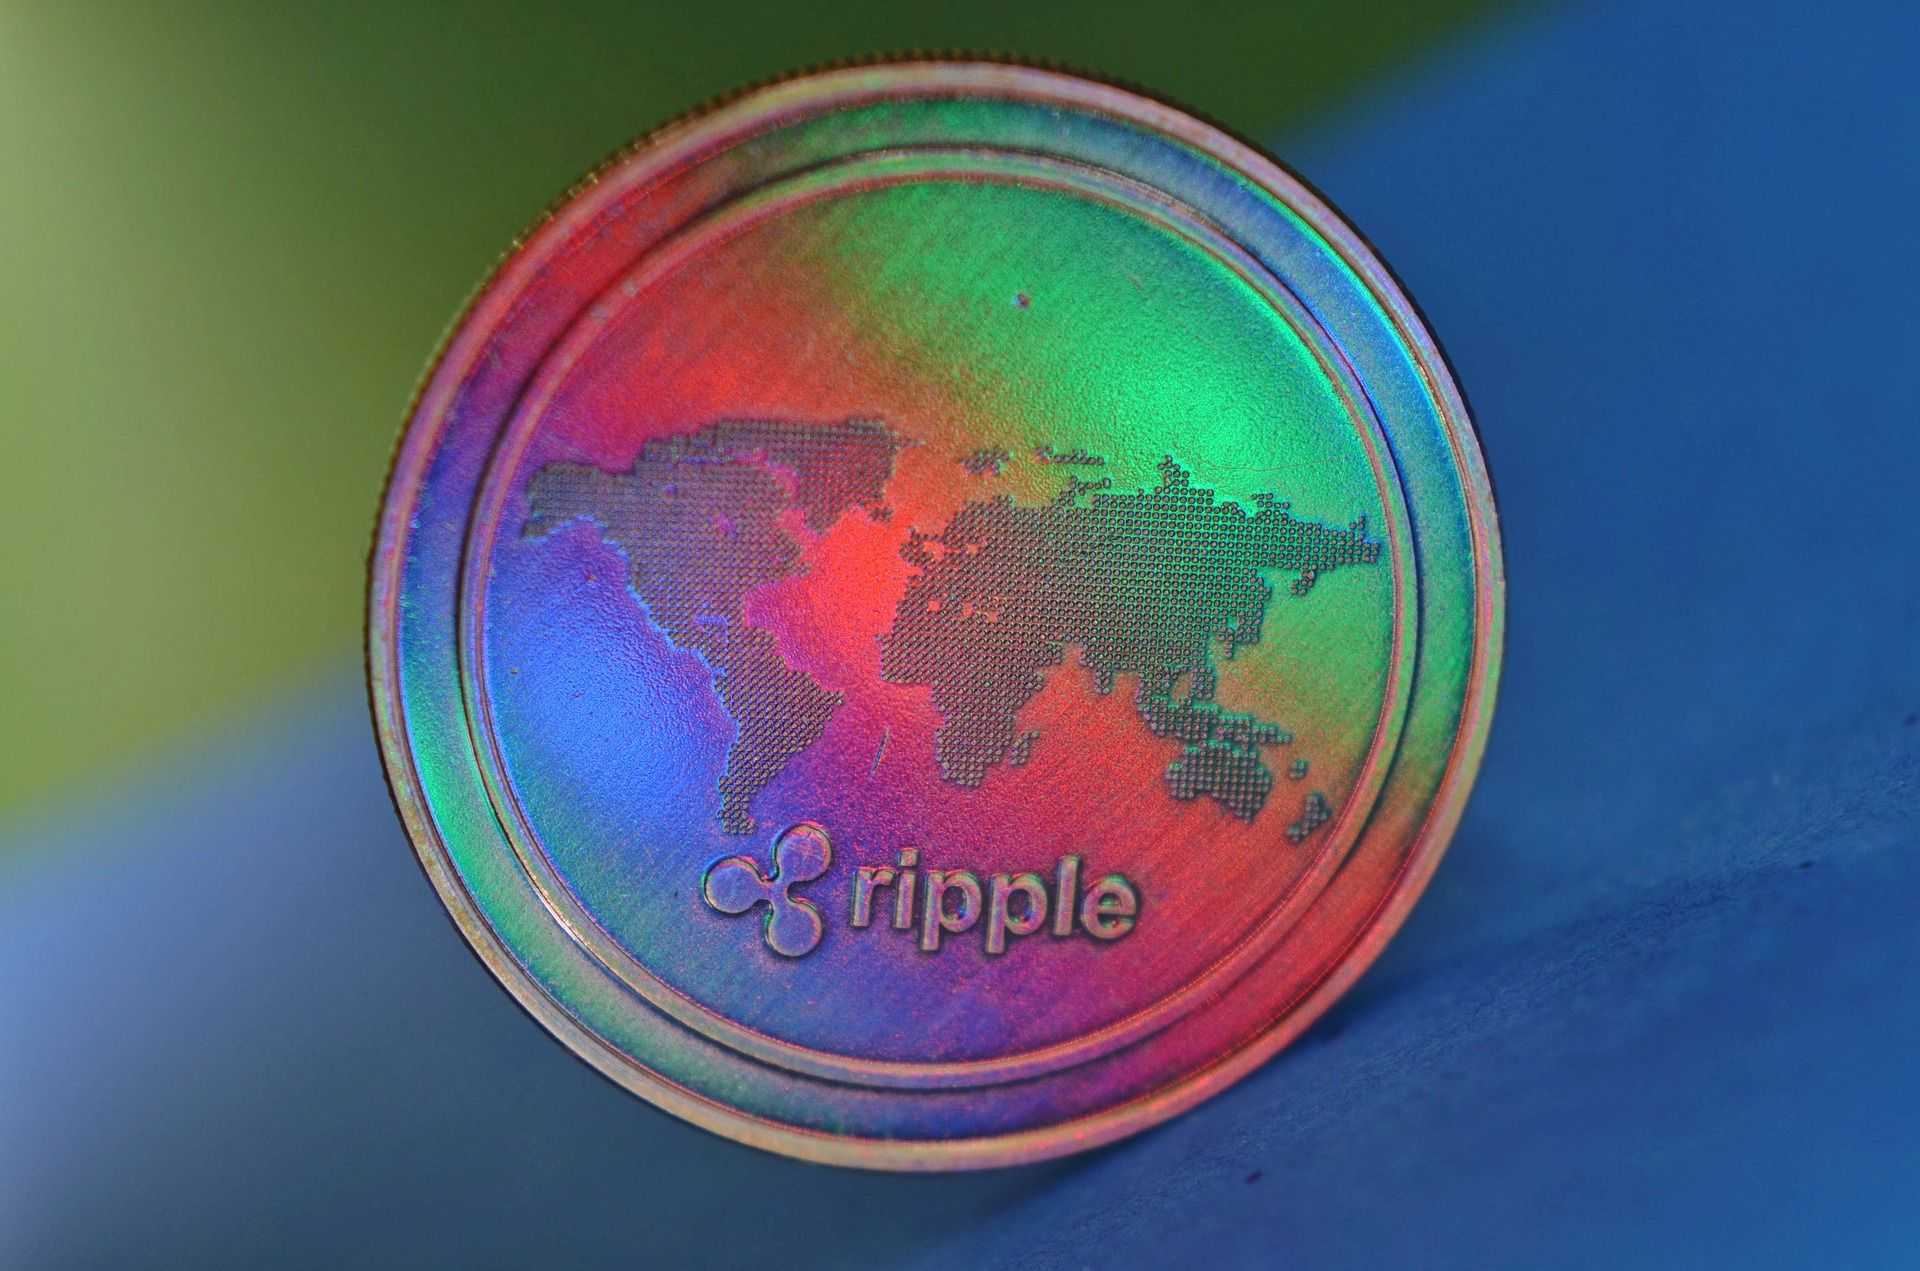 Ripple is faster and more scaleable than many other cryptocurrencies.